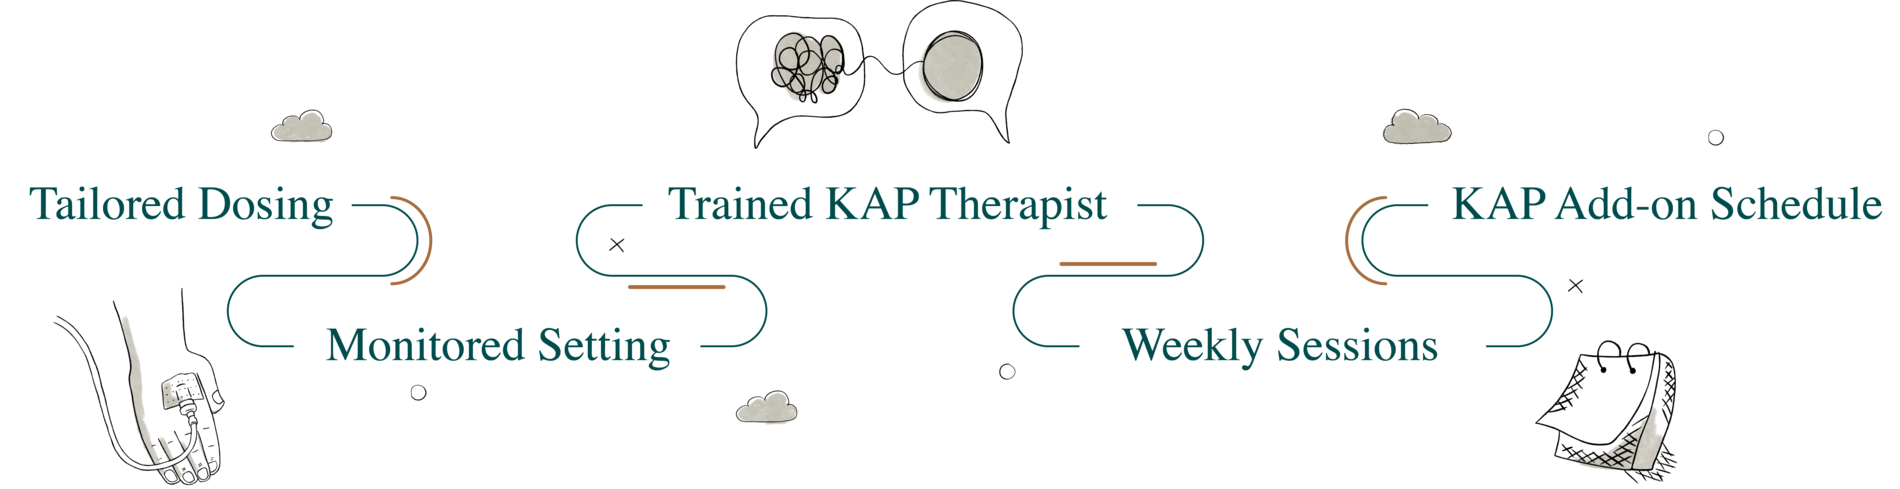 Ketamine-Assisted Psychotherapy | Midwest Ketamine Center